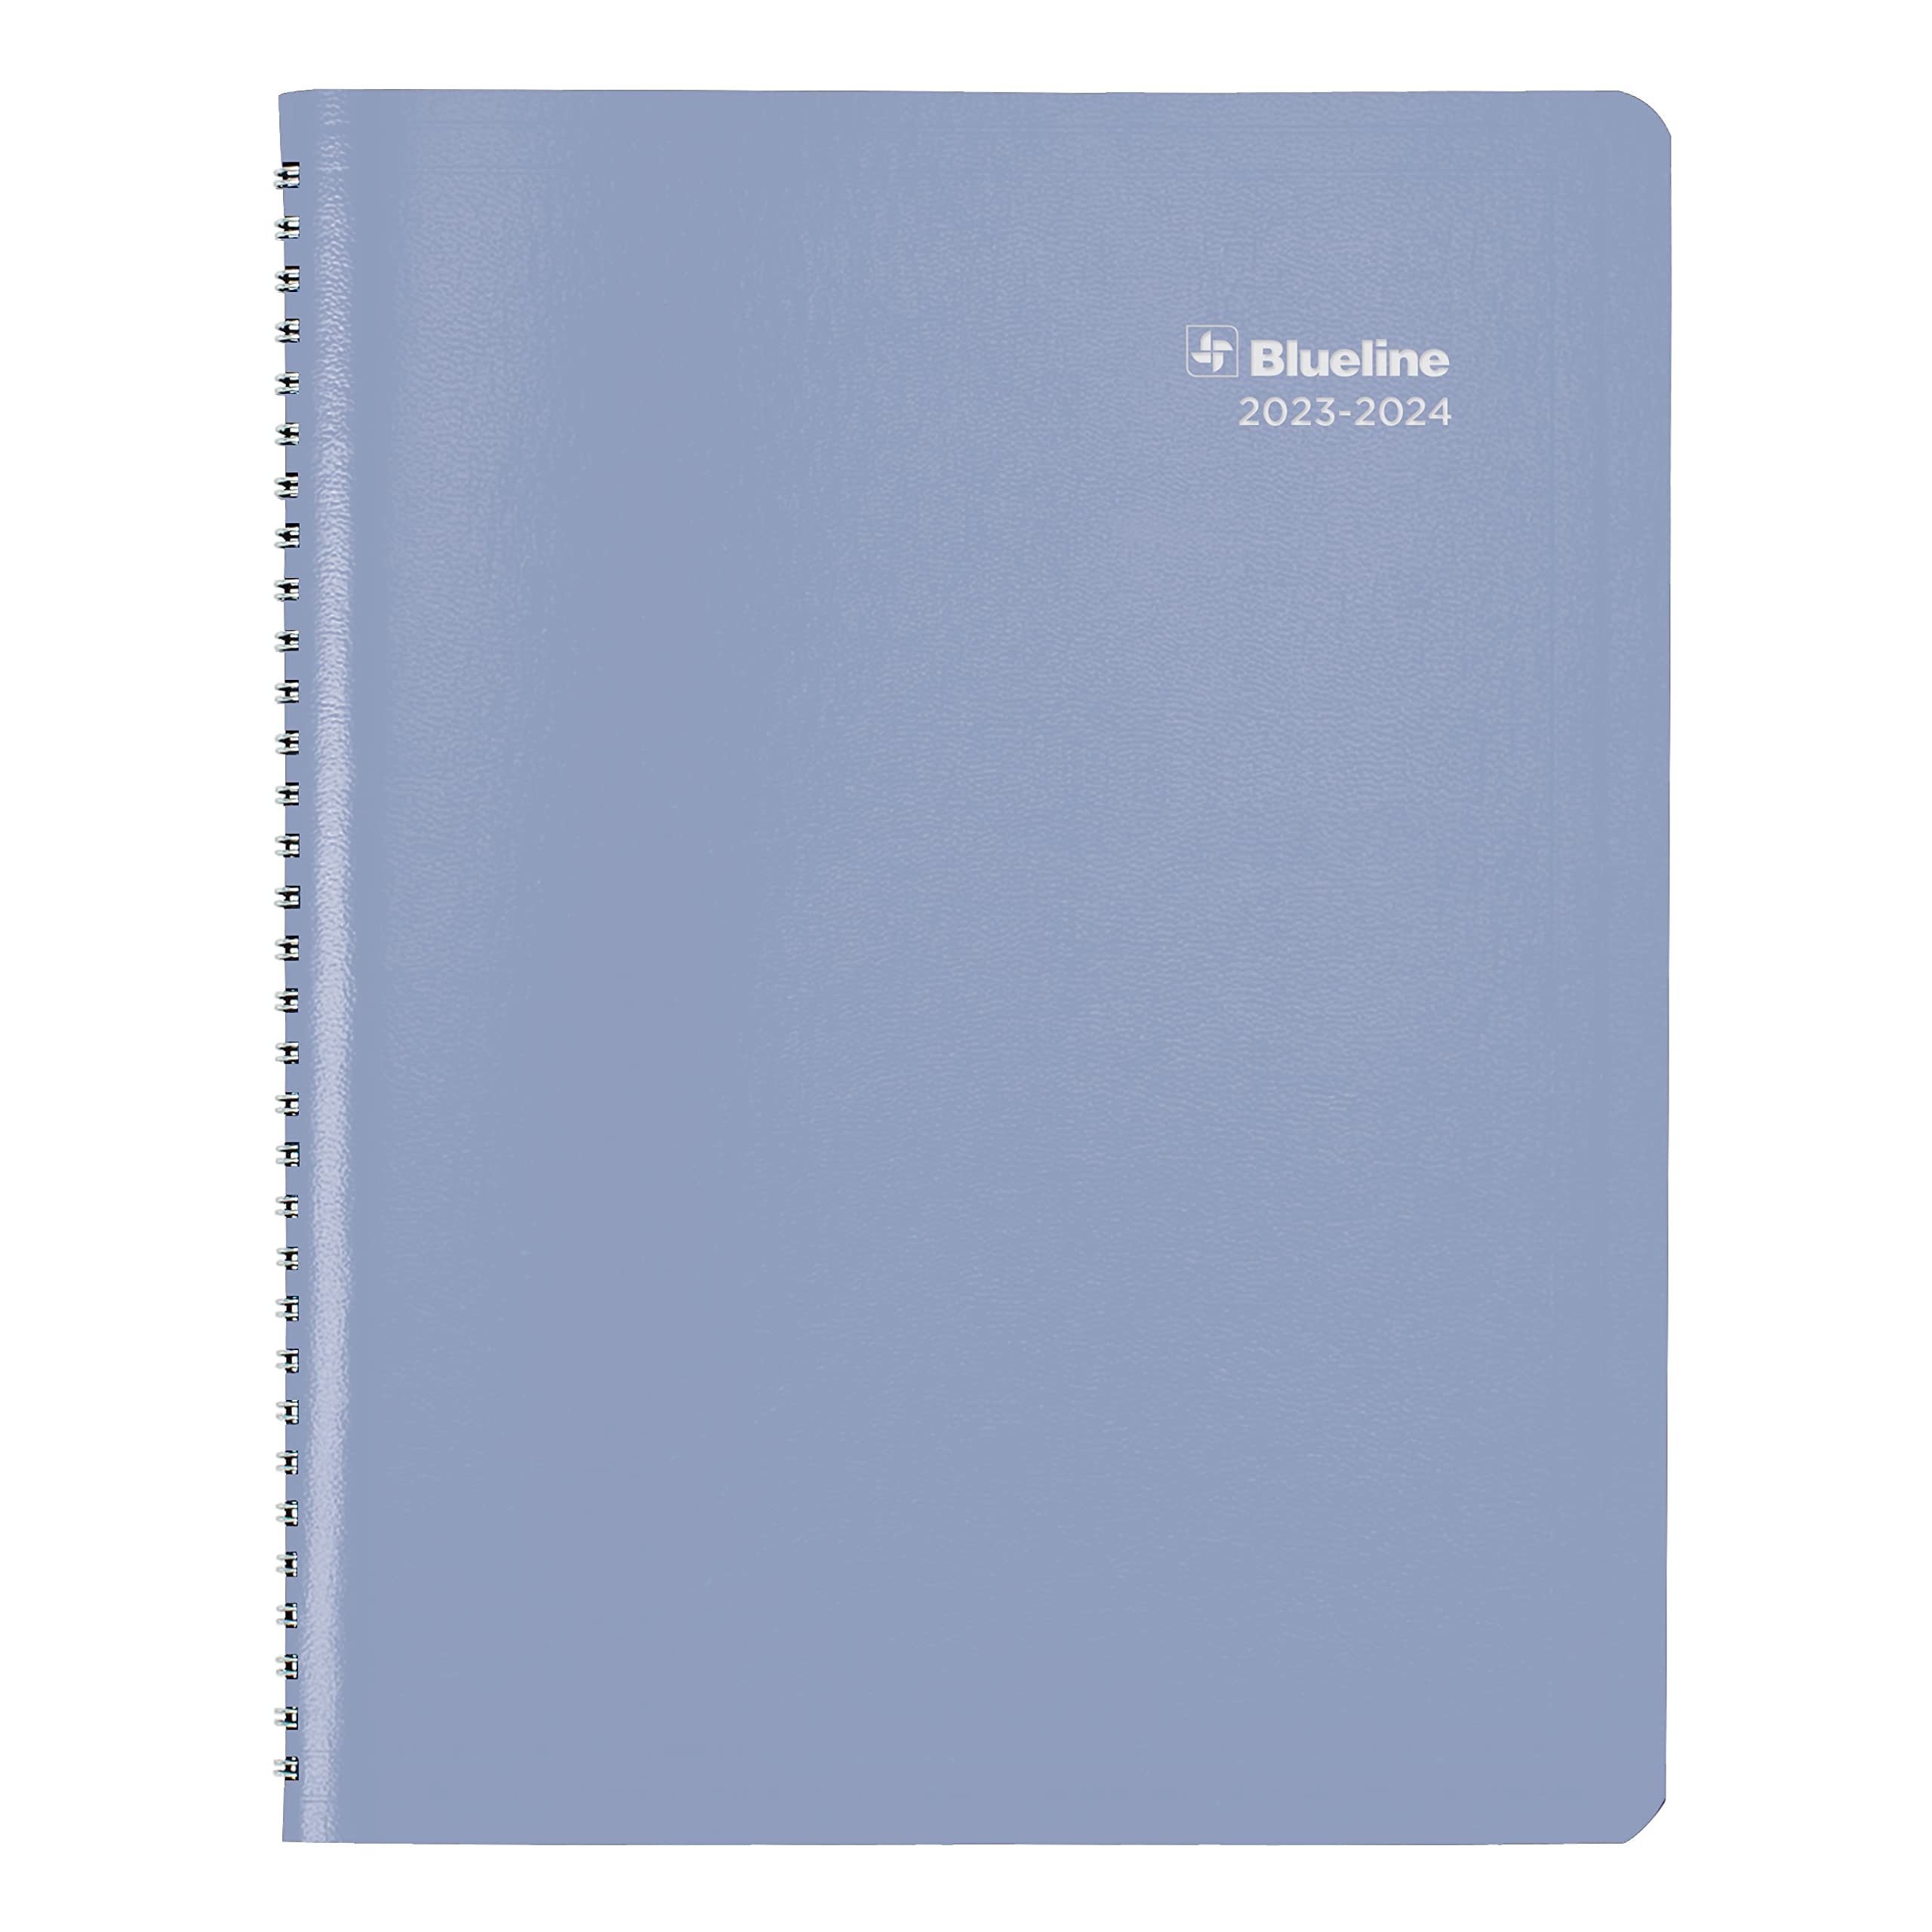 Blueline Essential Academic Monthly Planner, 14 Months, July 2023 to August 2024, Twin-Wire Binding, Soft Vicuana Cover, 11" x 8.5", Cloud Blue (CA701F.02-24)